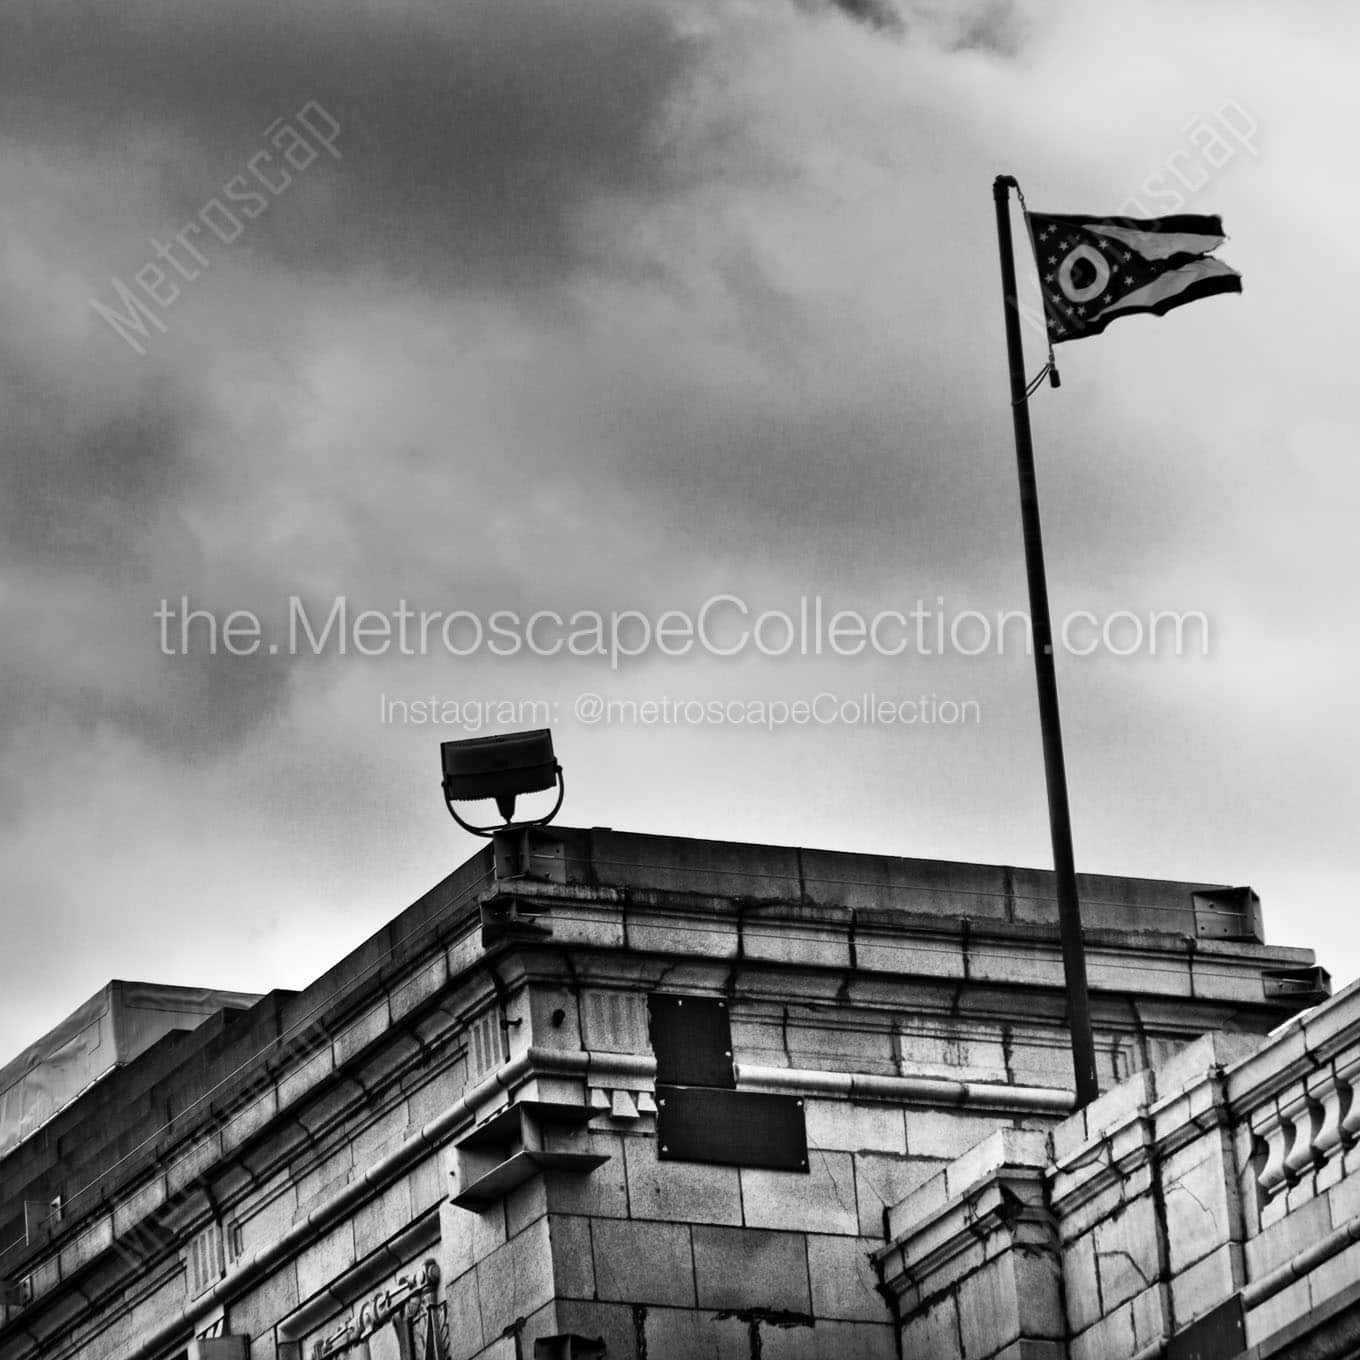 the ohio flag whipping in wind Black & White Office Art